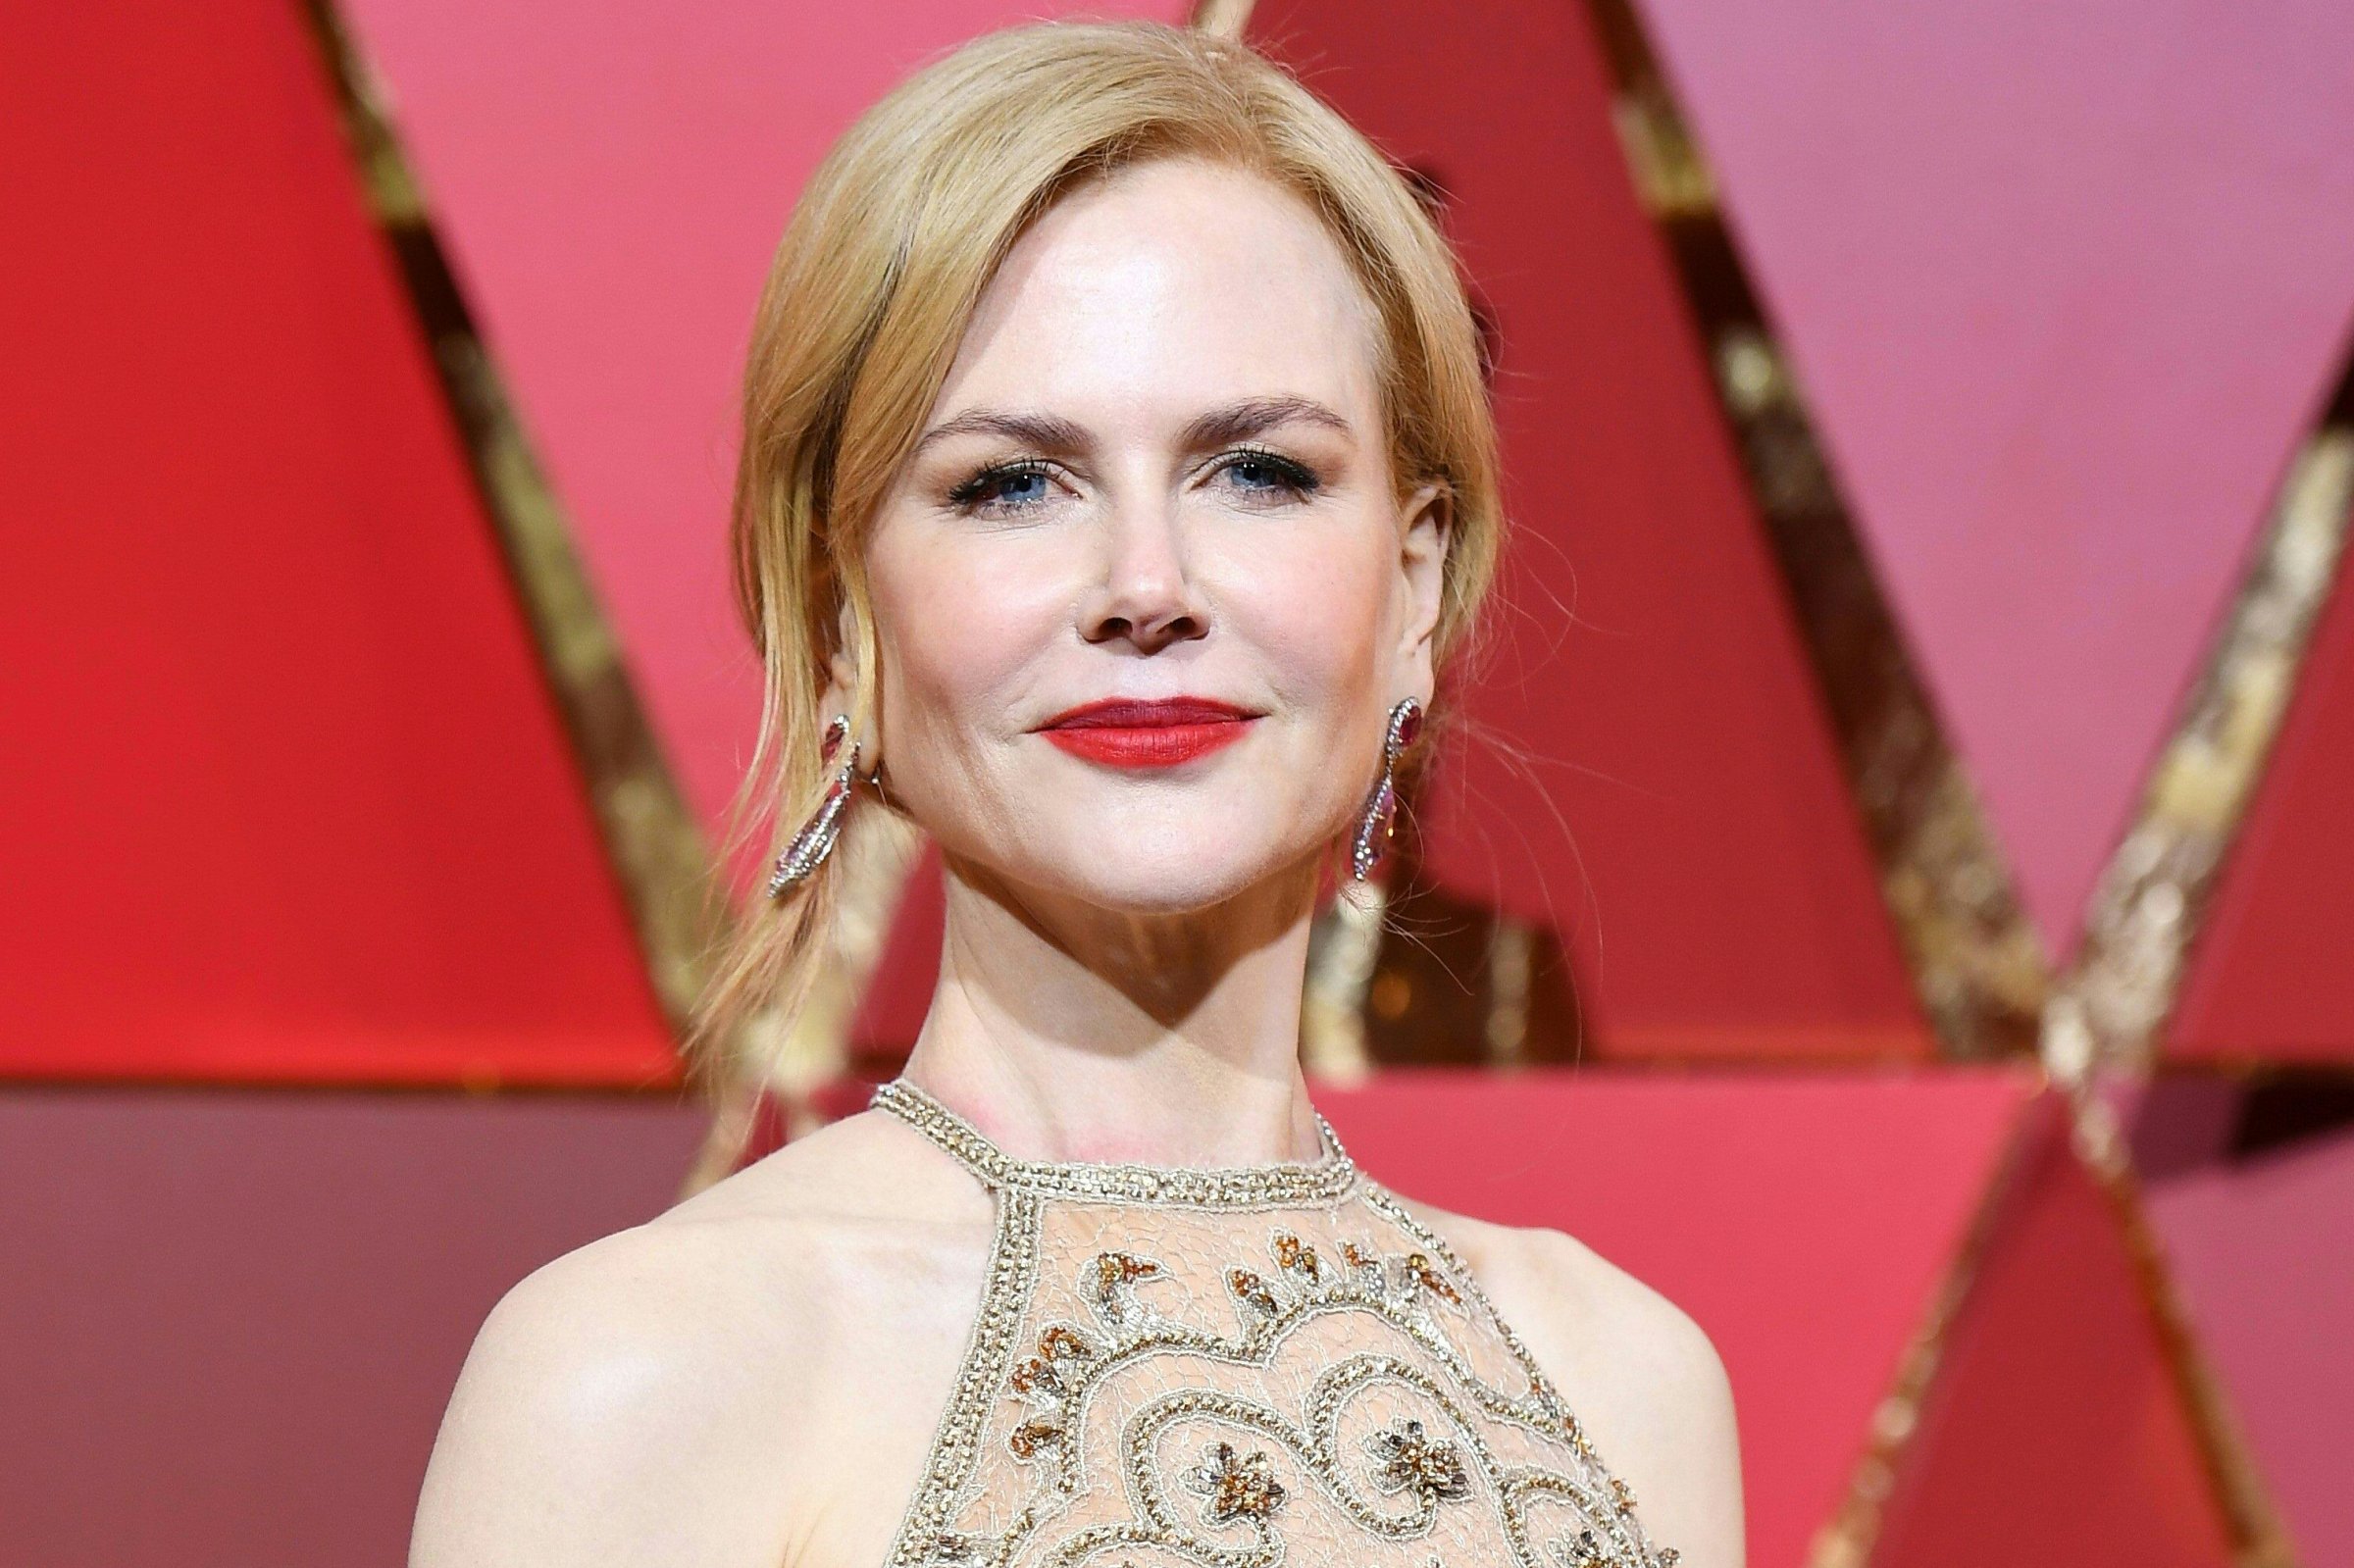 Nicole Kidman arrives on the red carpet for the 89th Oscars, on Feb. 26, 2017 in Hollywood, Calif.